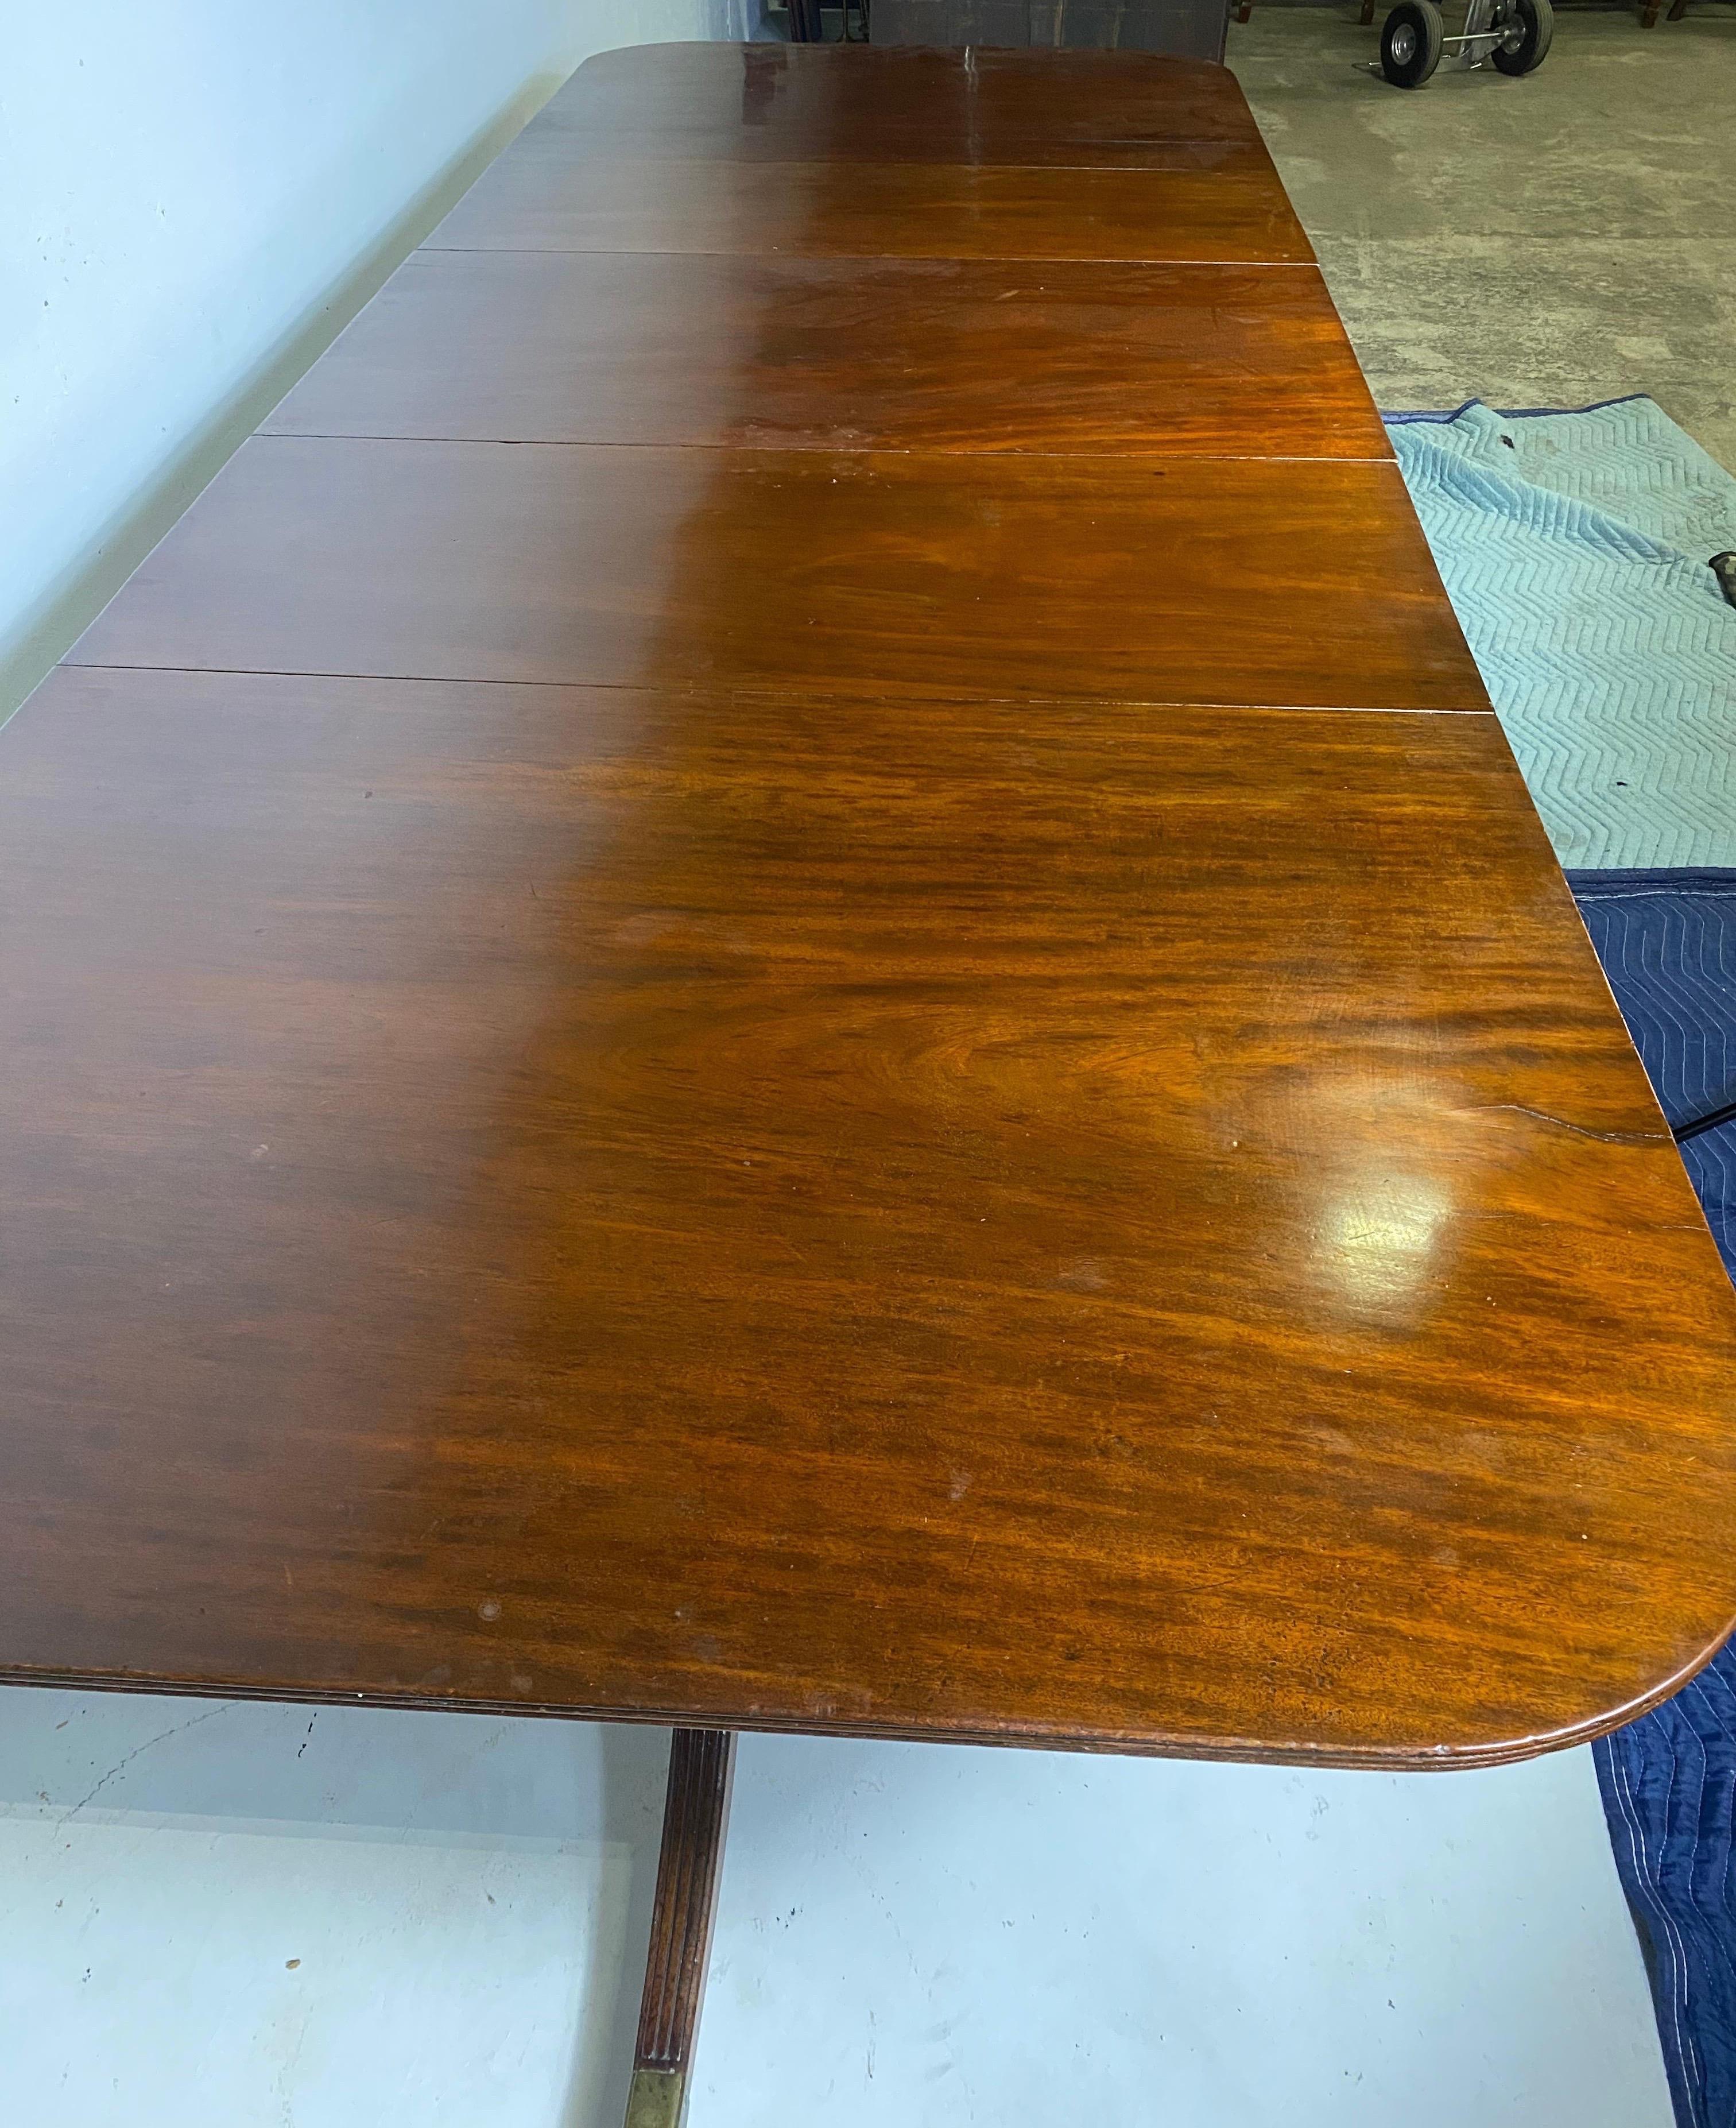 Very fine early 19th century English mahogany triple pedestal dining table with 2 leaves, clips and original castors. Great quality Cuban mahogany. Provenance- from the Massey estate on Monument Avenue, Richmond VA.